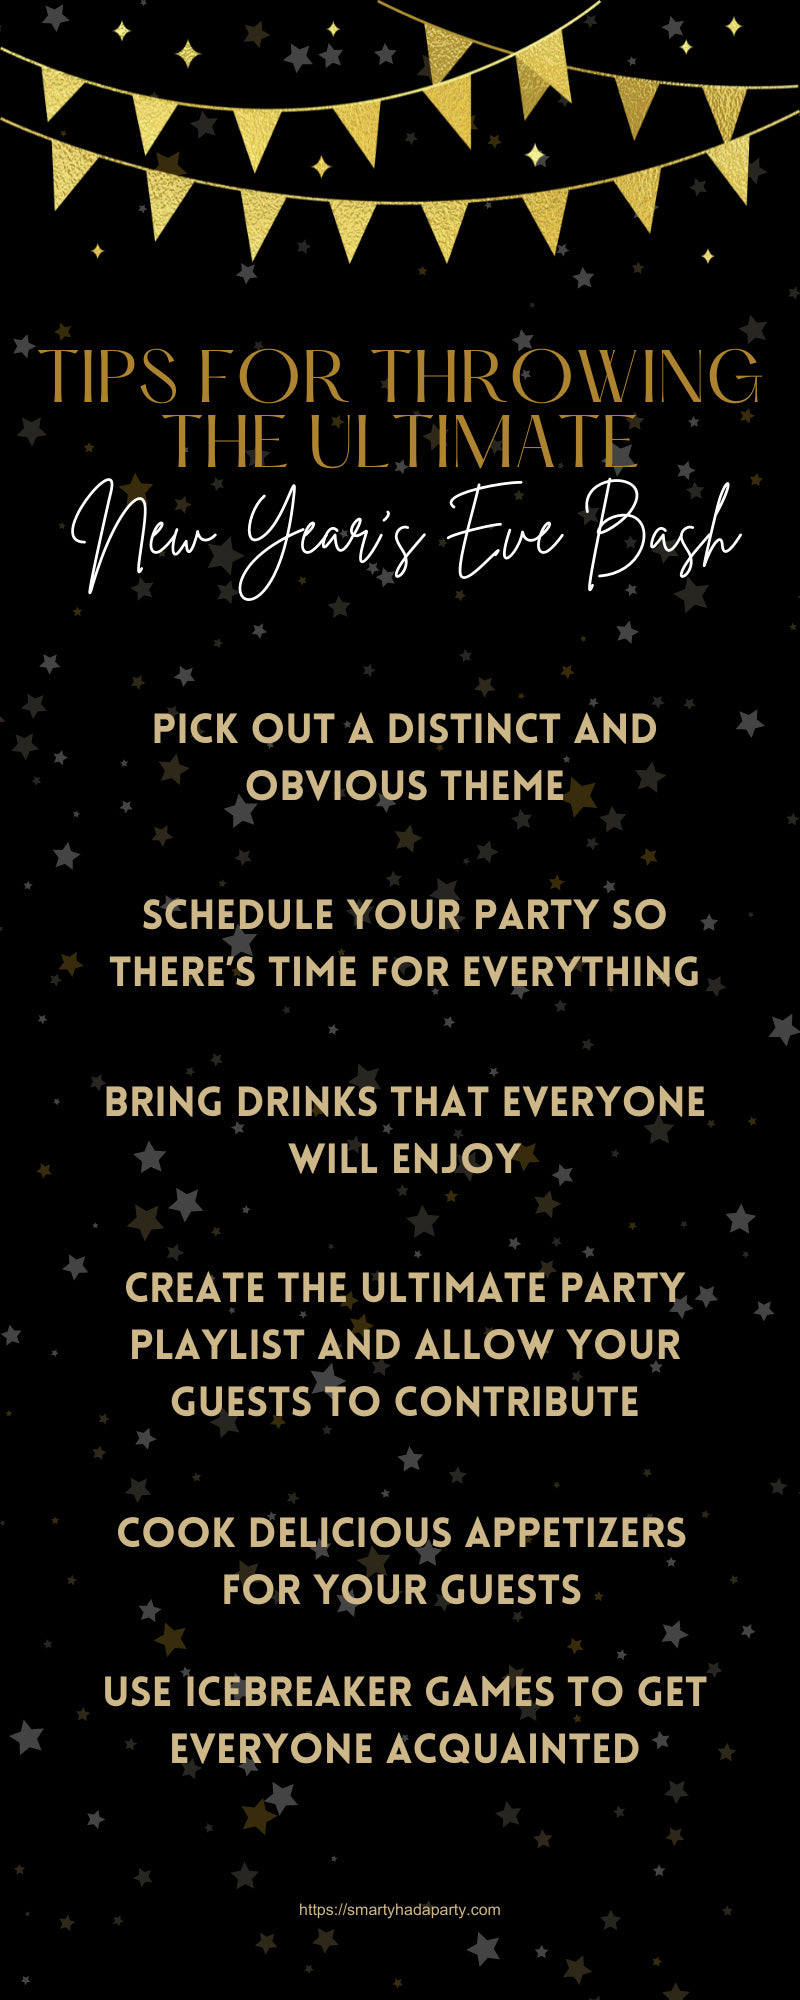 Tips for Throwing the Ultimate New Year’s Eve Bash